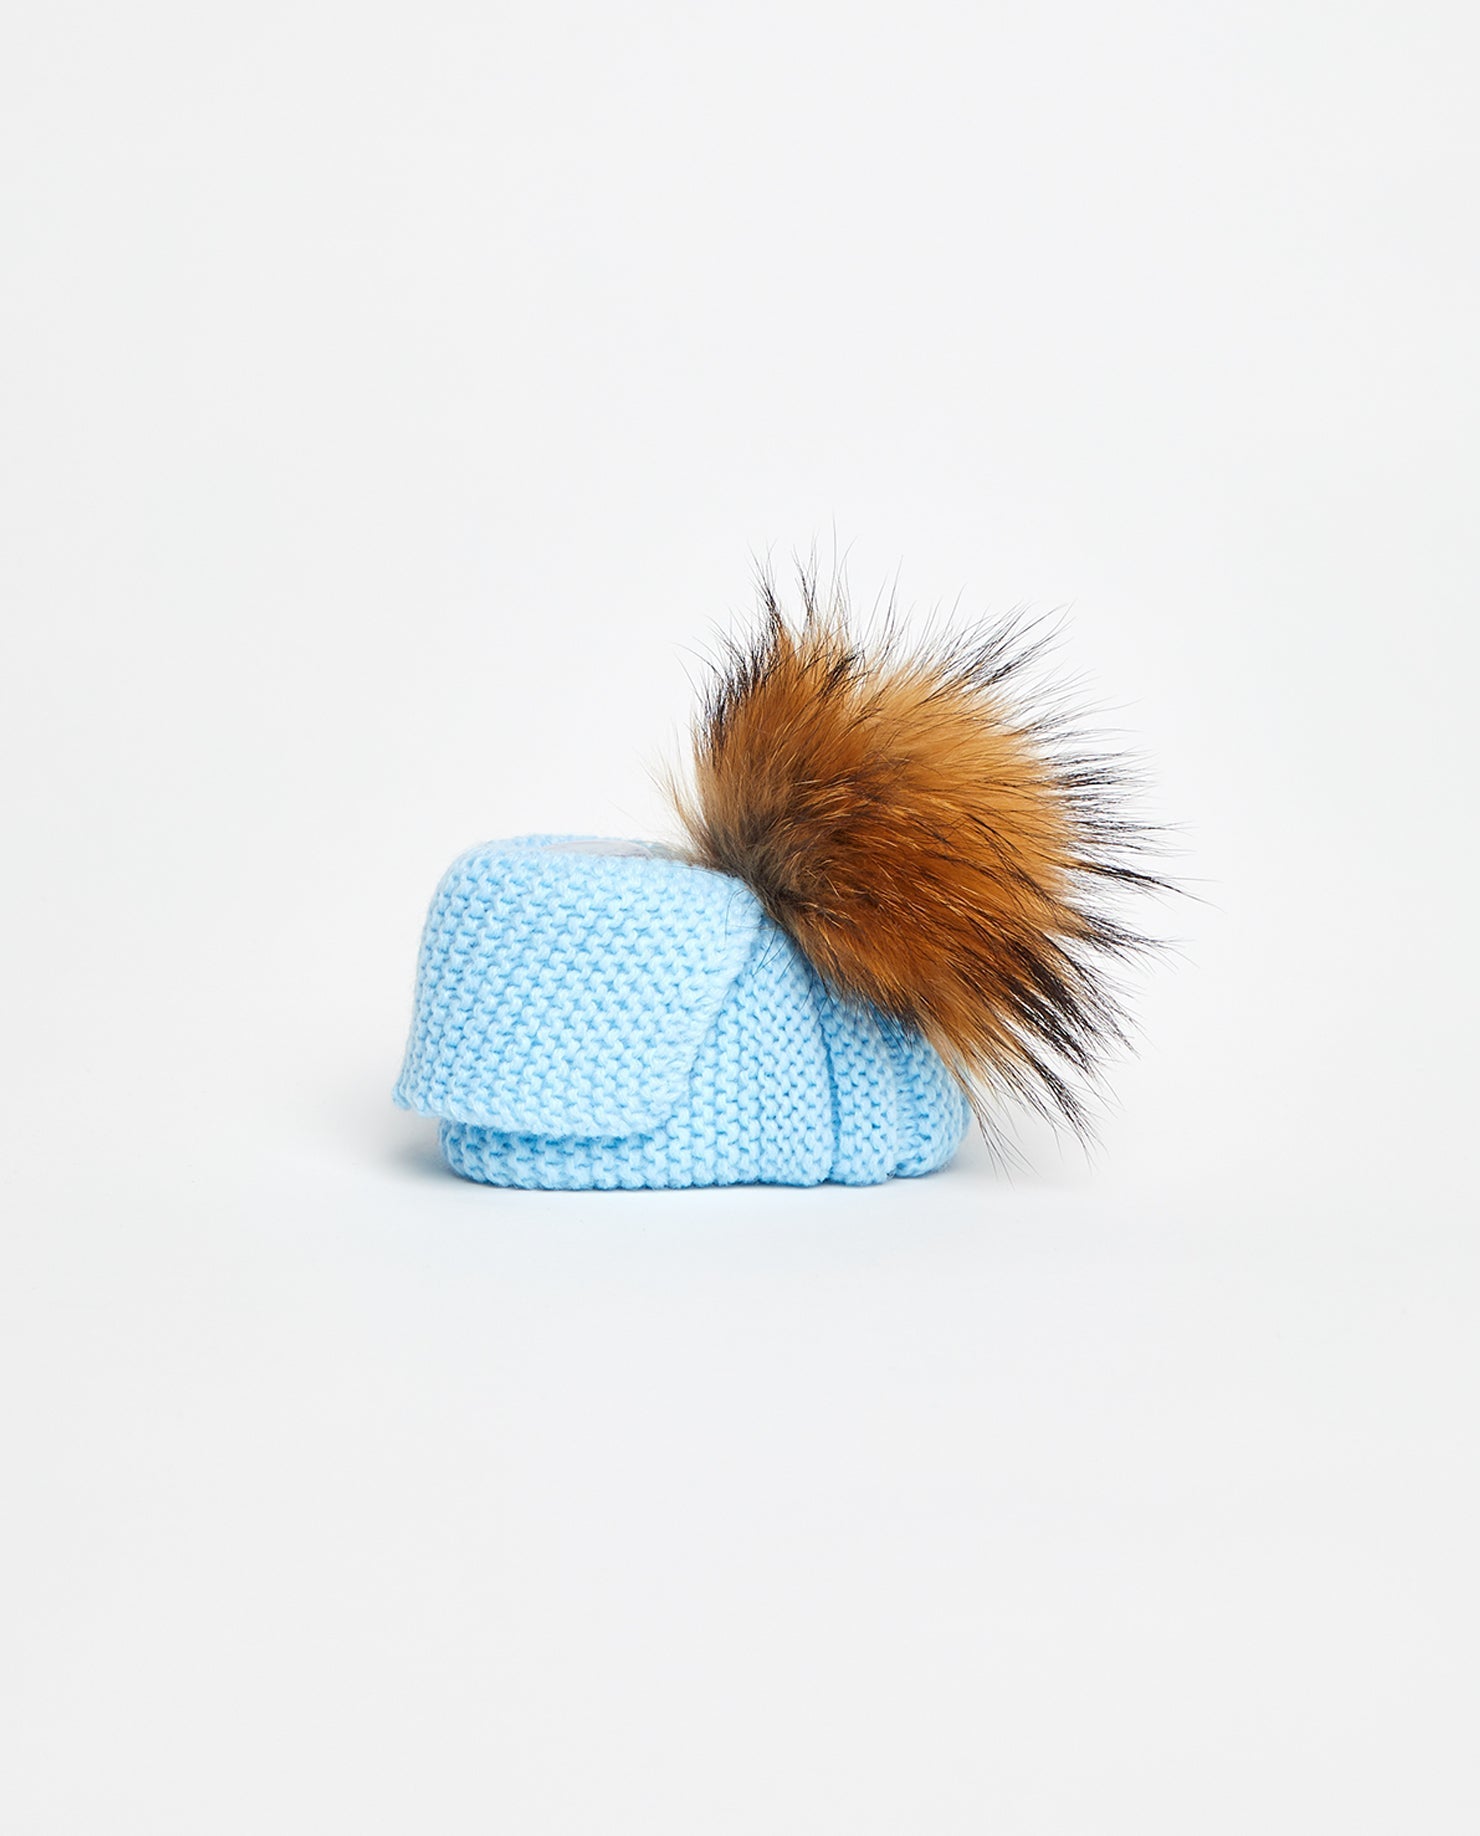 Pantoufles Tricot | Knit Slippers BABY BLUE - Mpompon